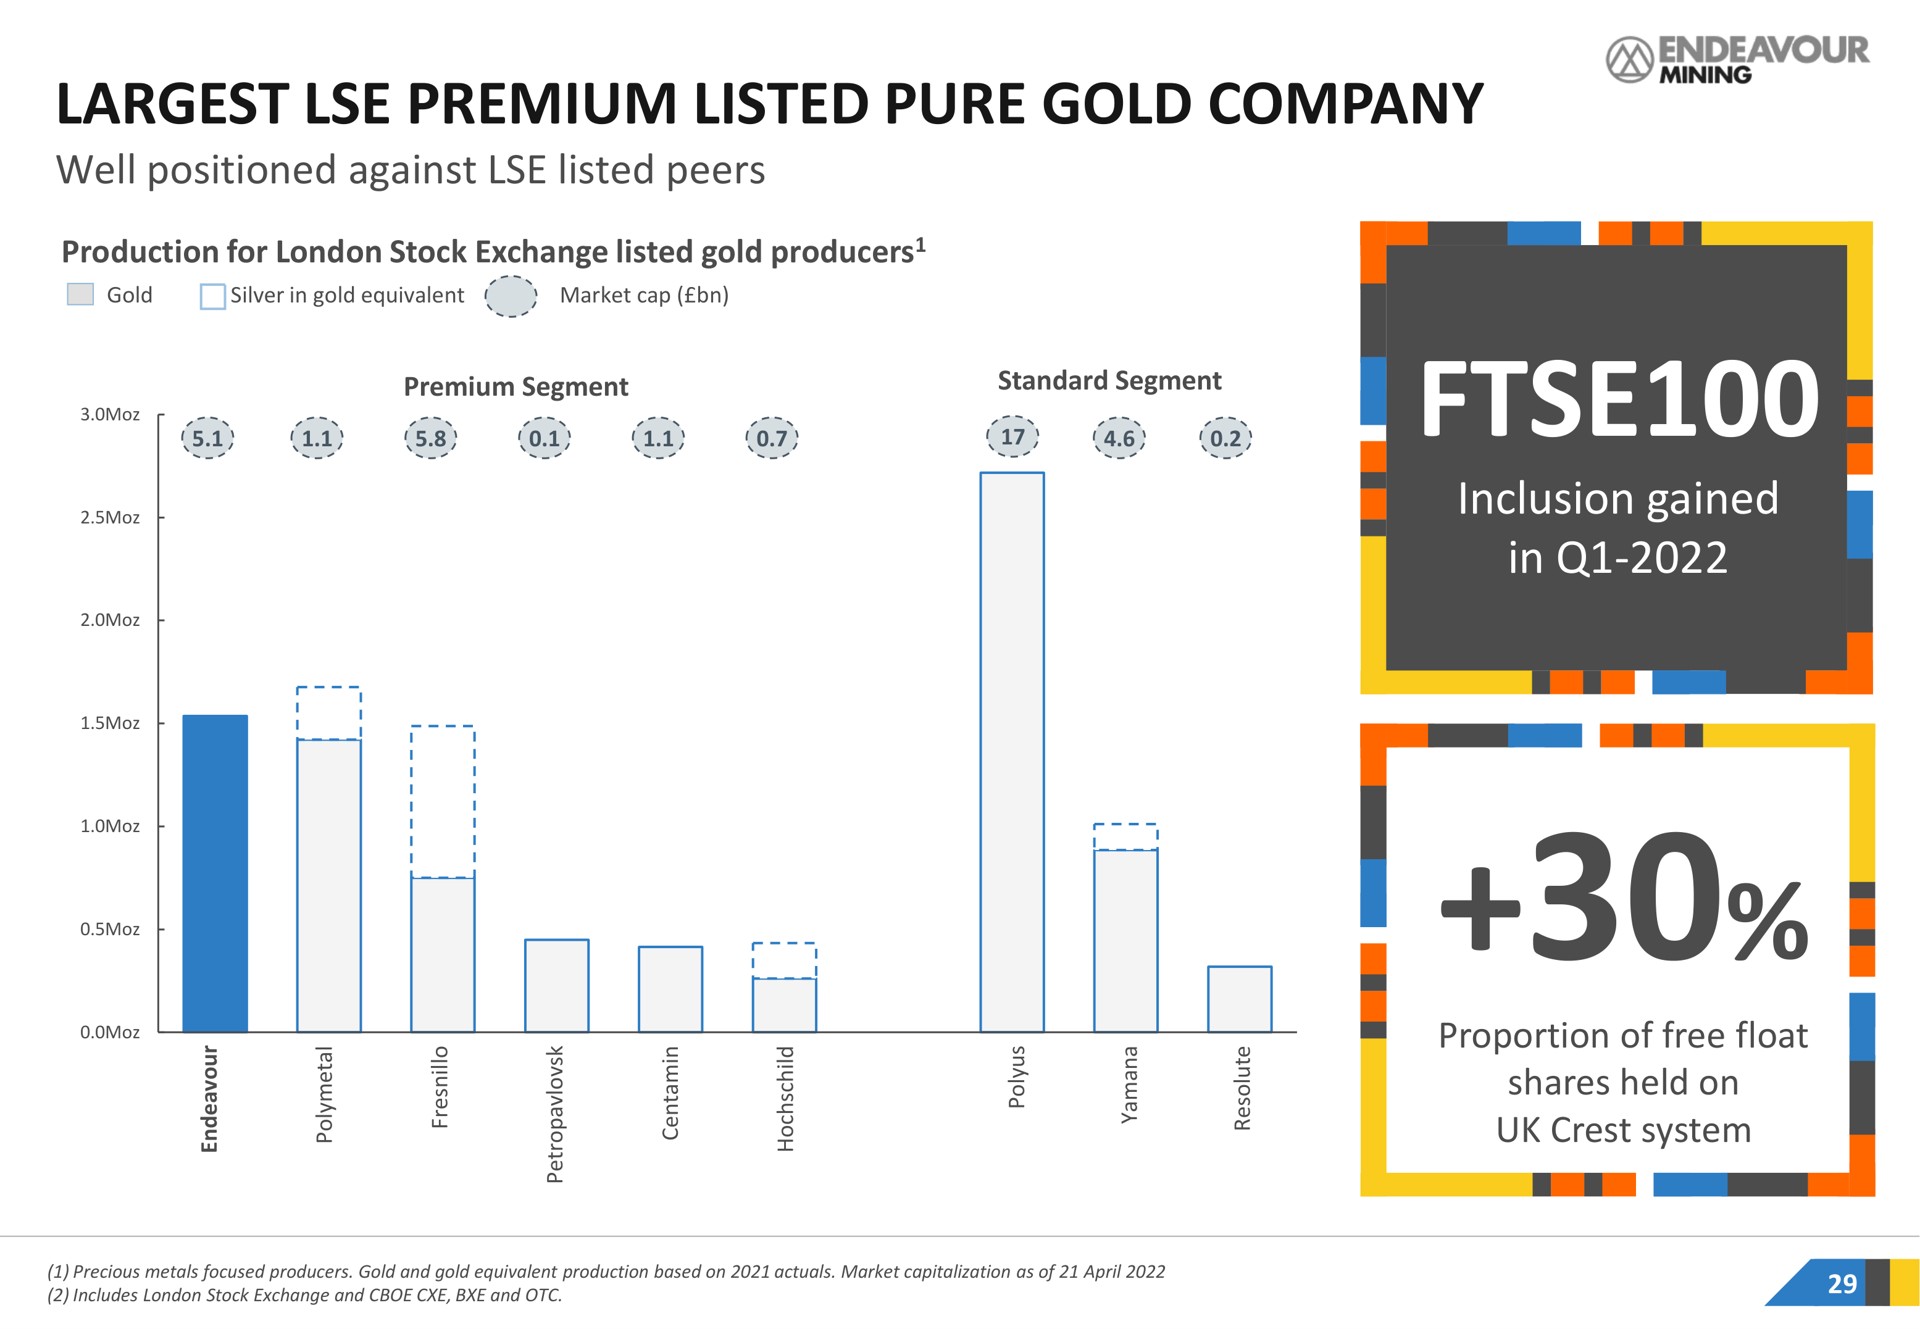 premium listed pure gold company well positioned against listed peers inclusion gained in | Endeavour Mining